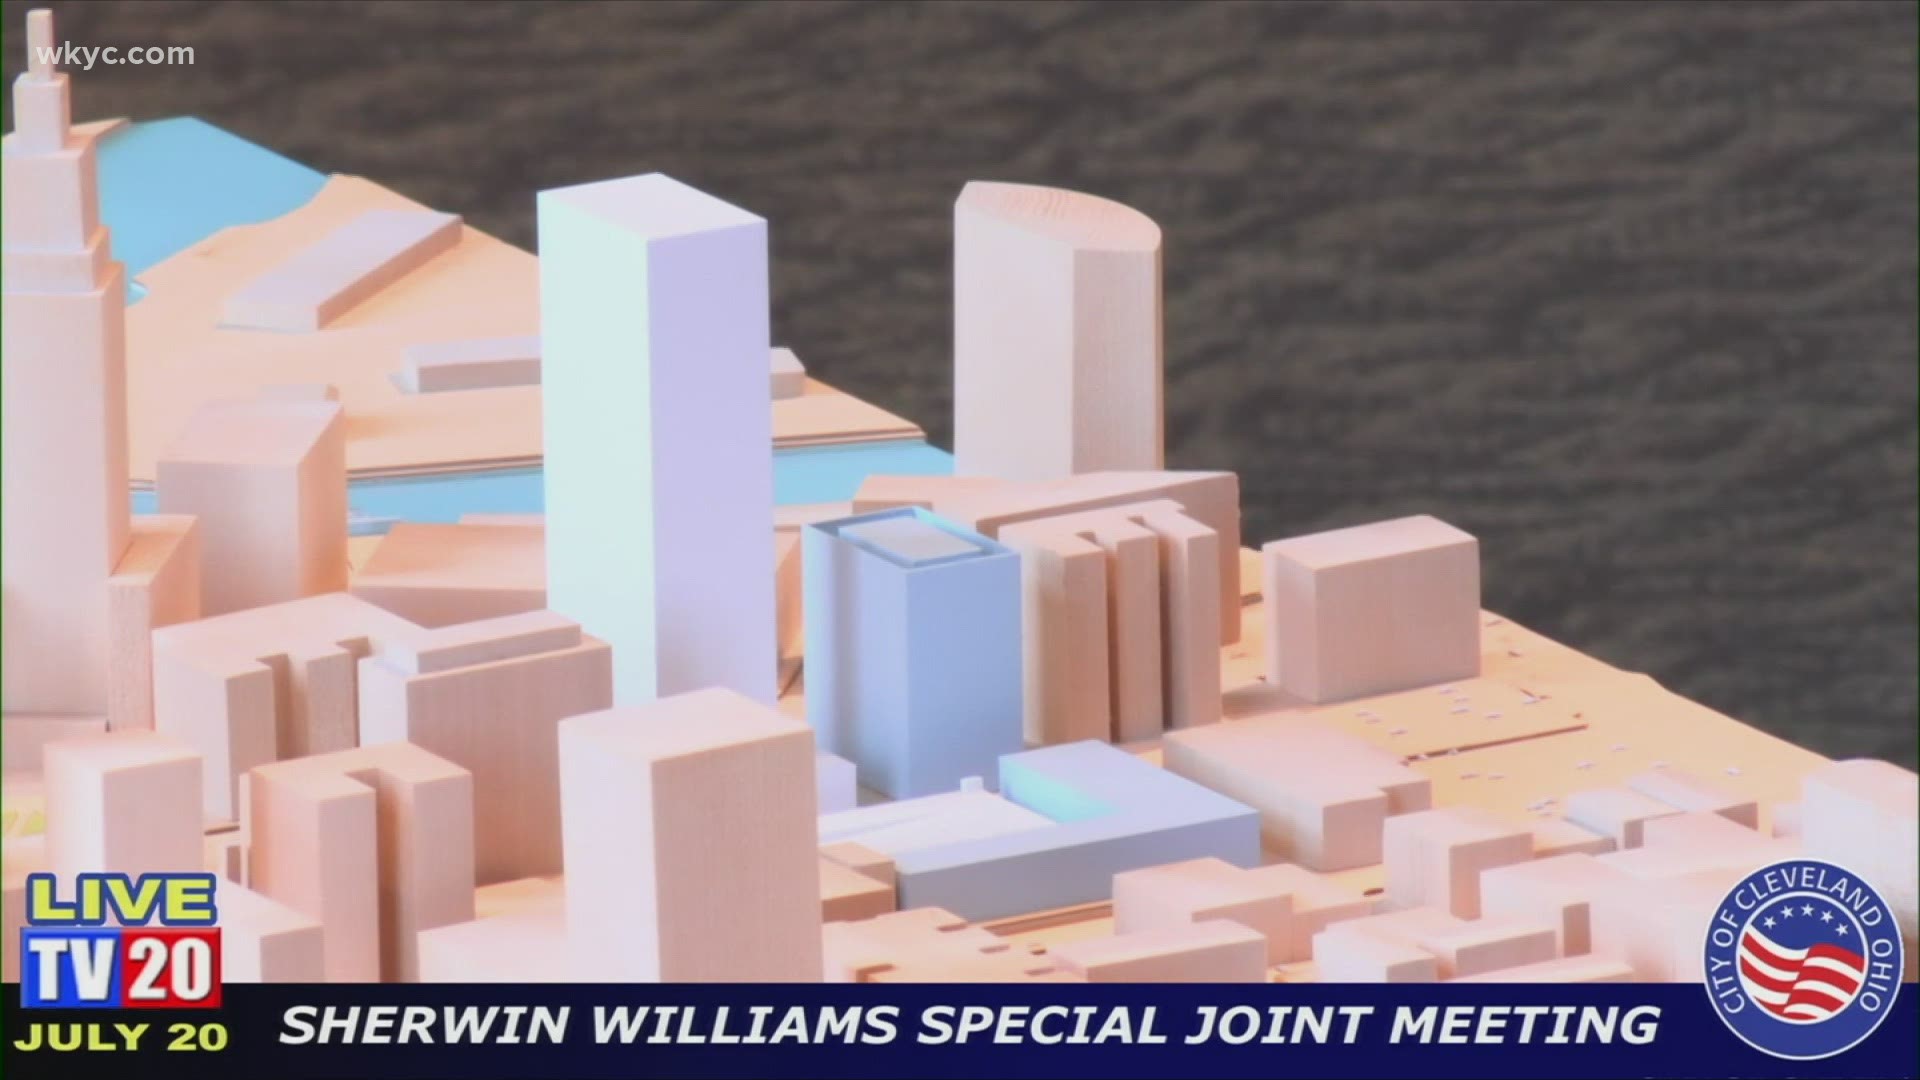 Representatives from Sherwin-Williams met with the city planning commission, and showed off the campus layout for the headquarters